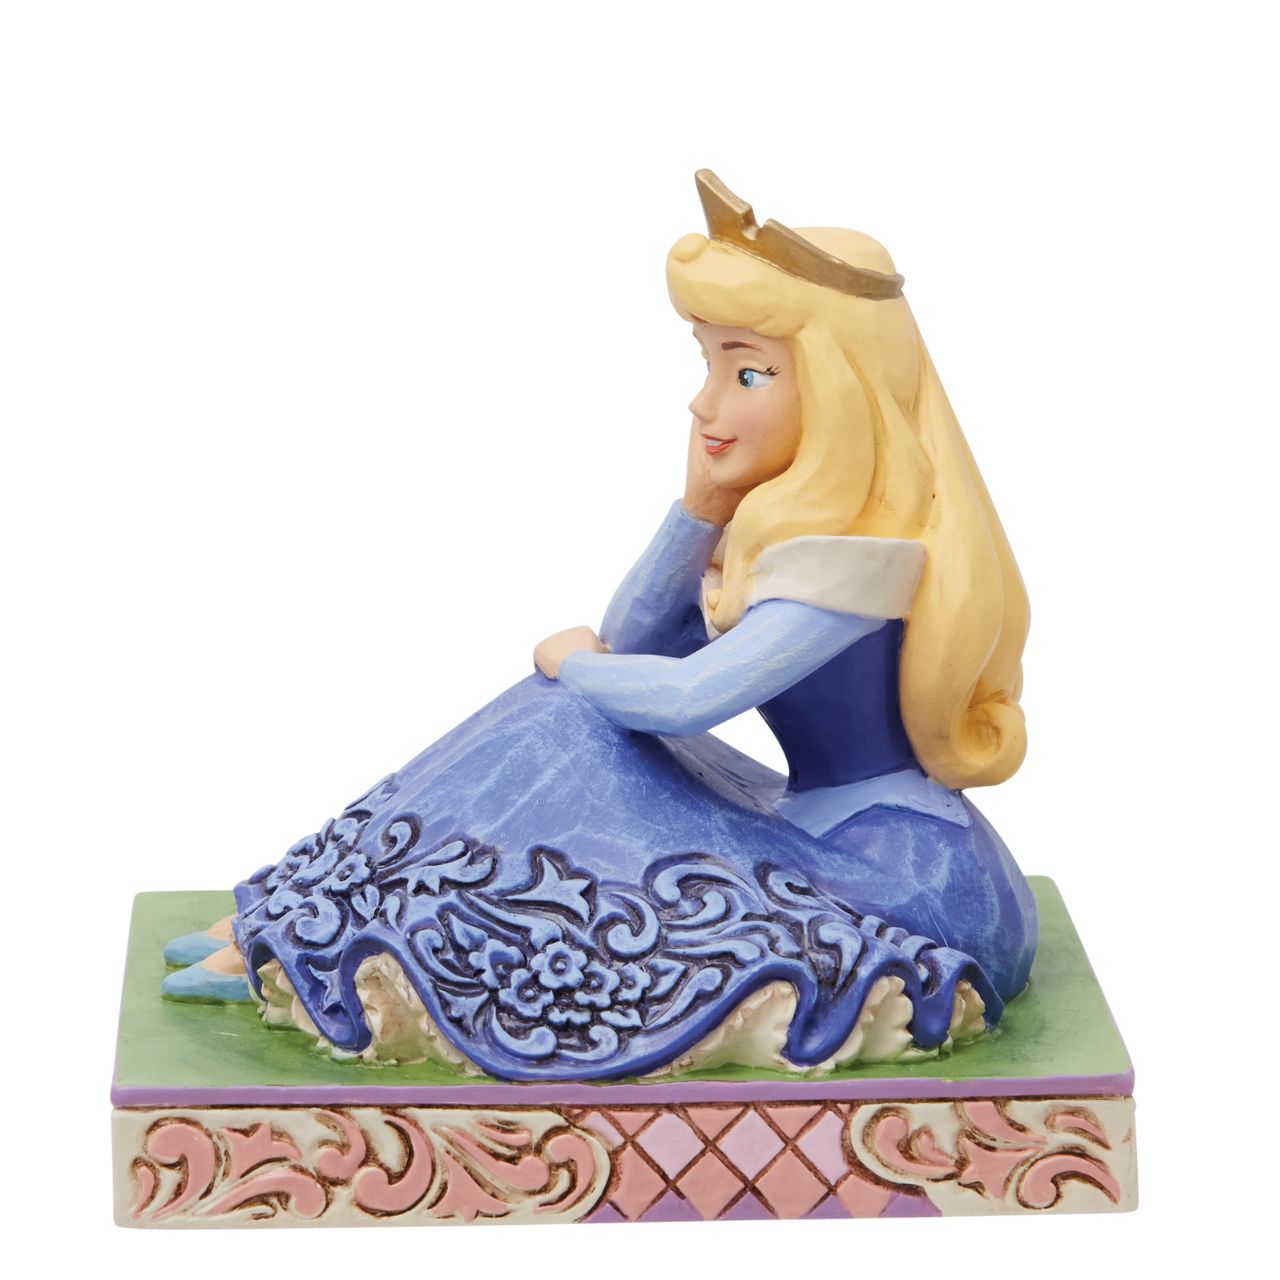 Disney Traditions Princess Aurora Personality Pose Figurine by Jim Shore  This beautiful personality pose features Disney's beloved Princess Aurora, showcasing what she is known for; grace & being gentle. Designed by award winning artist Jim Shore, hand crafted using high quality cast stone and hand painted.